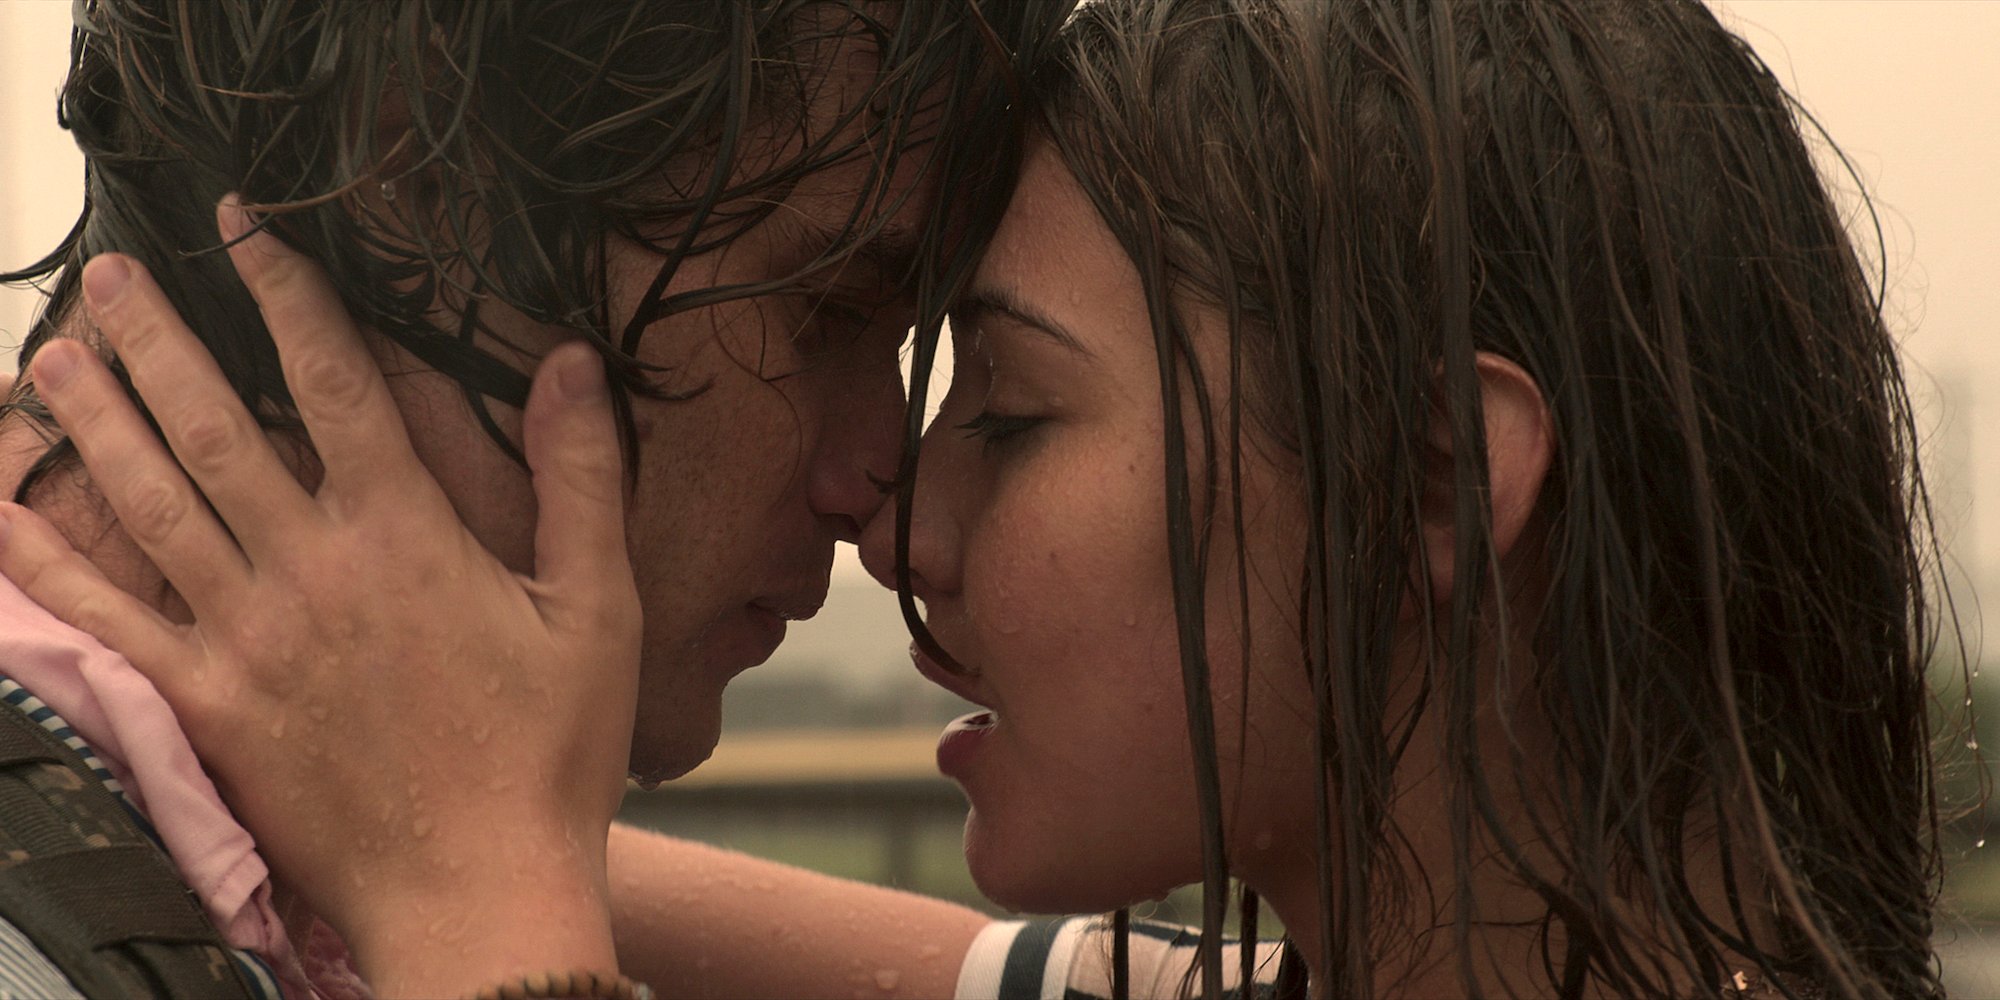 Chase Stokes and Madelyn Cline kissing in the rain in ‘Outer Banks’ Season 1.